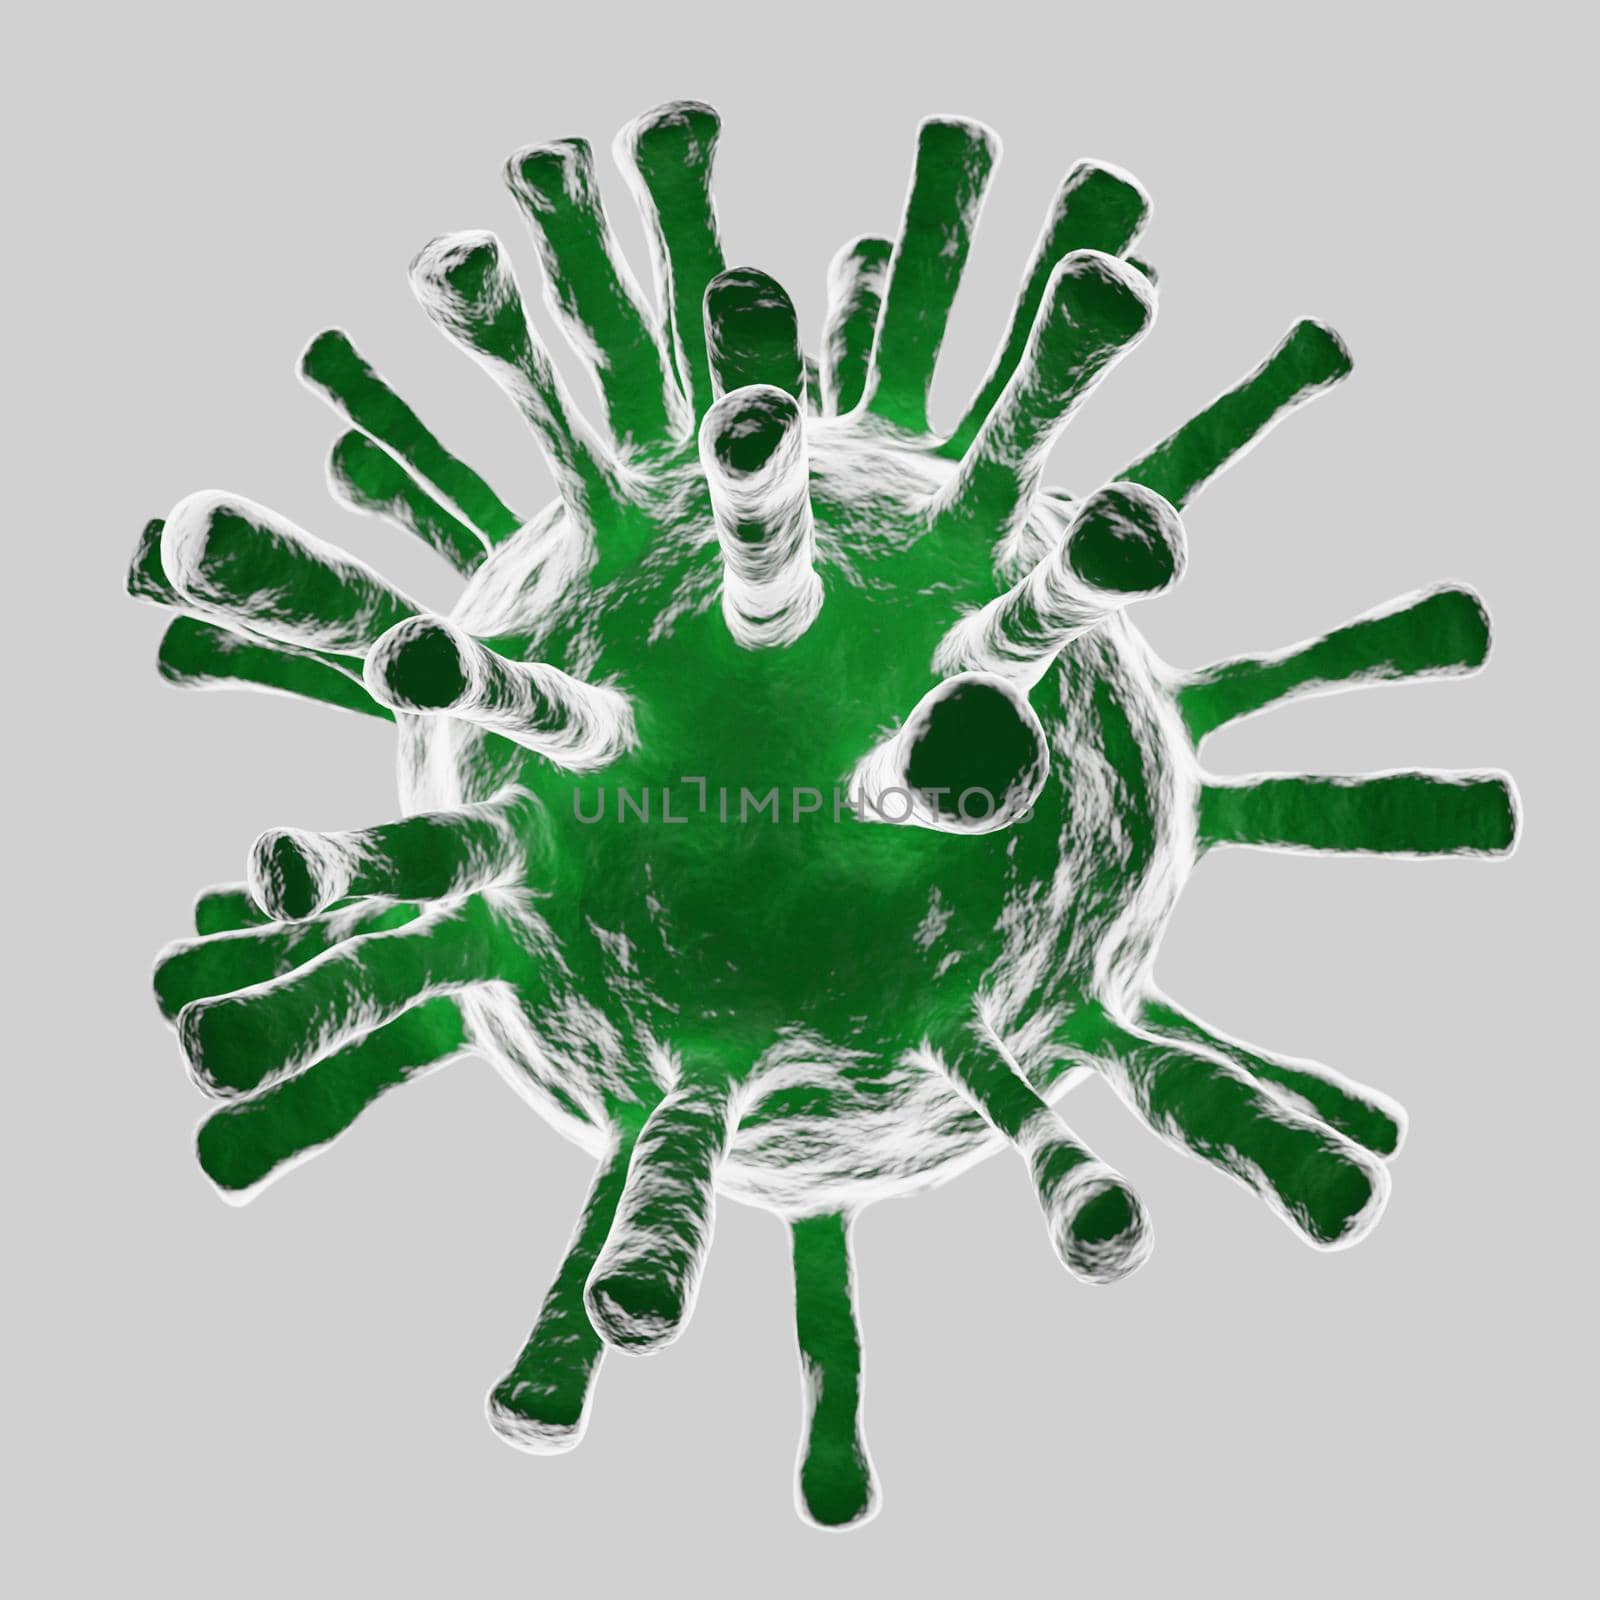 Abstract Corona Virus 19 Microscopic Particles Scattered on white background Research idea for the coronavirus 2019 genetic material that is spreading heavily all over the world 3d rendering. by noppha80